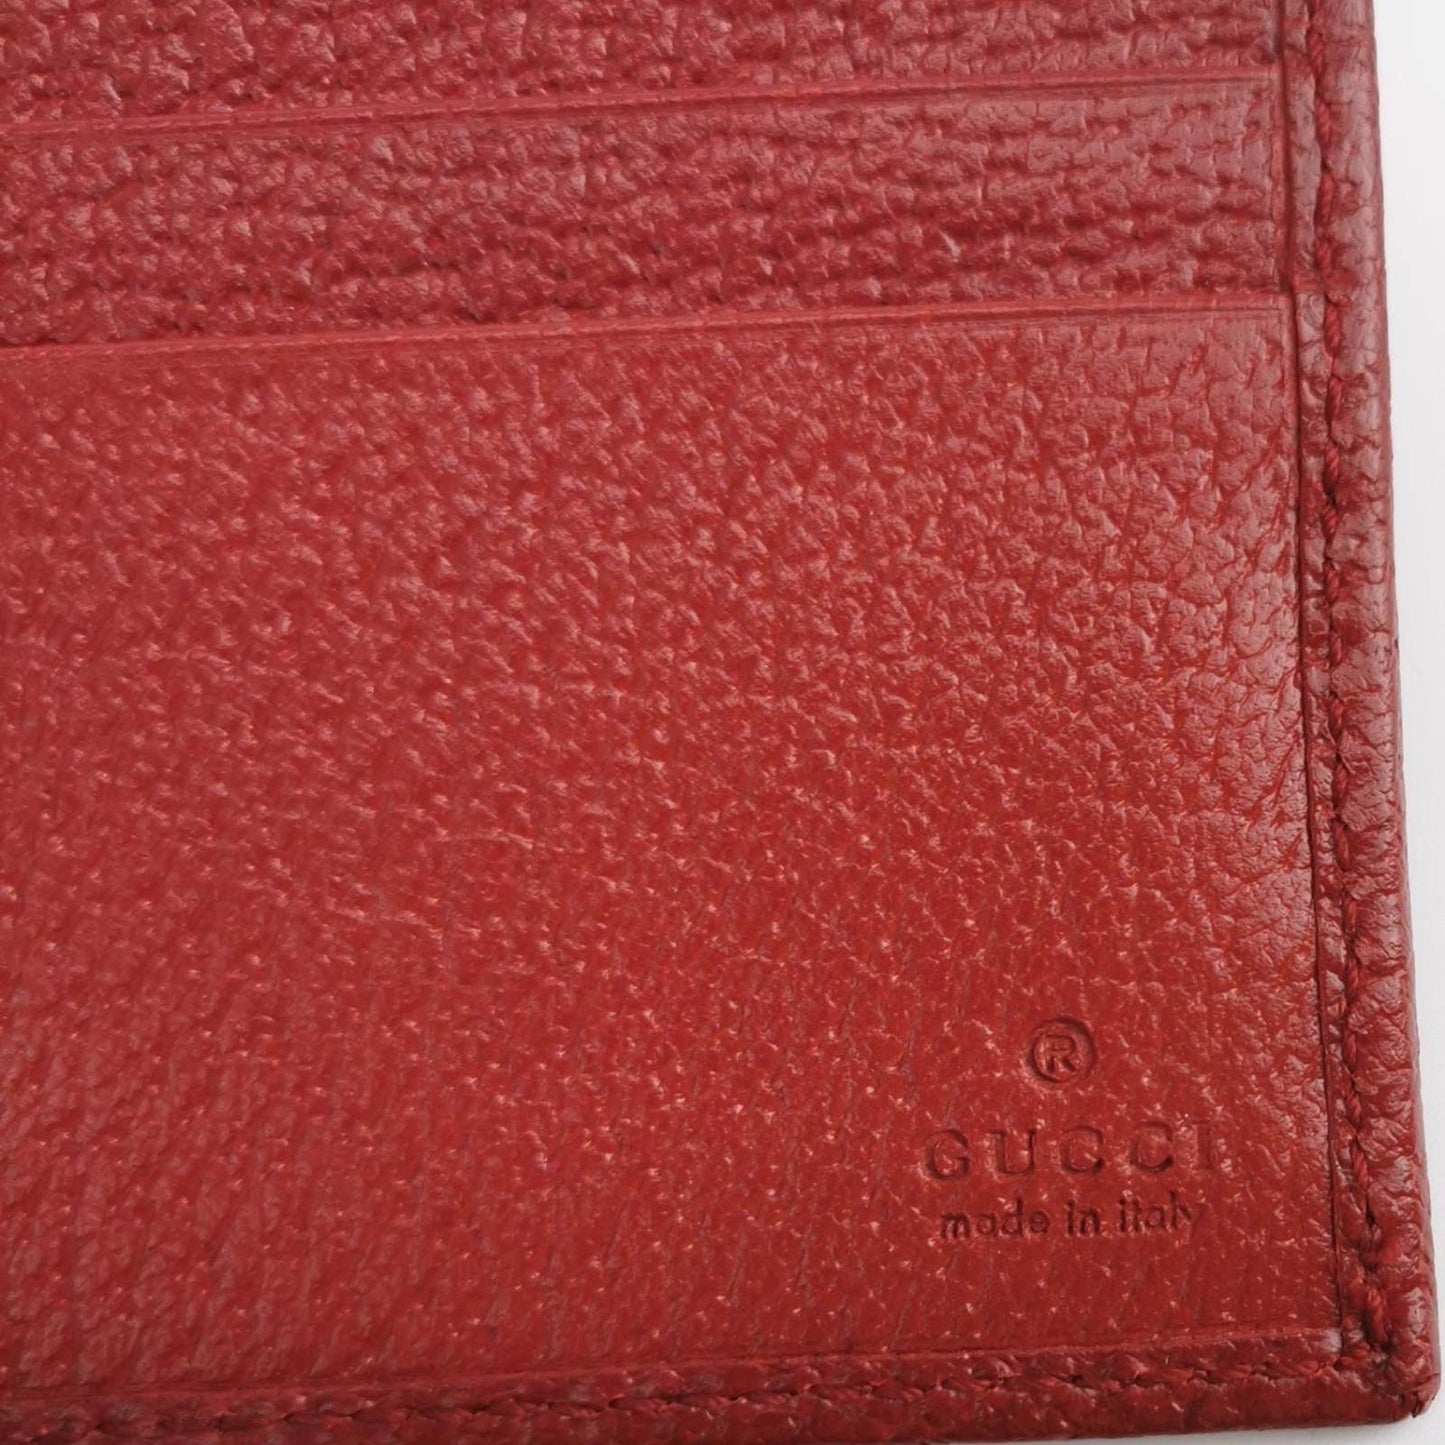 GUCCI 100 CENTENNIAL COTTON AND LEATHER WALLET